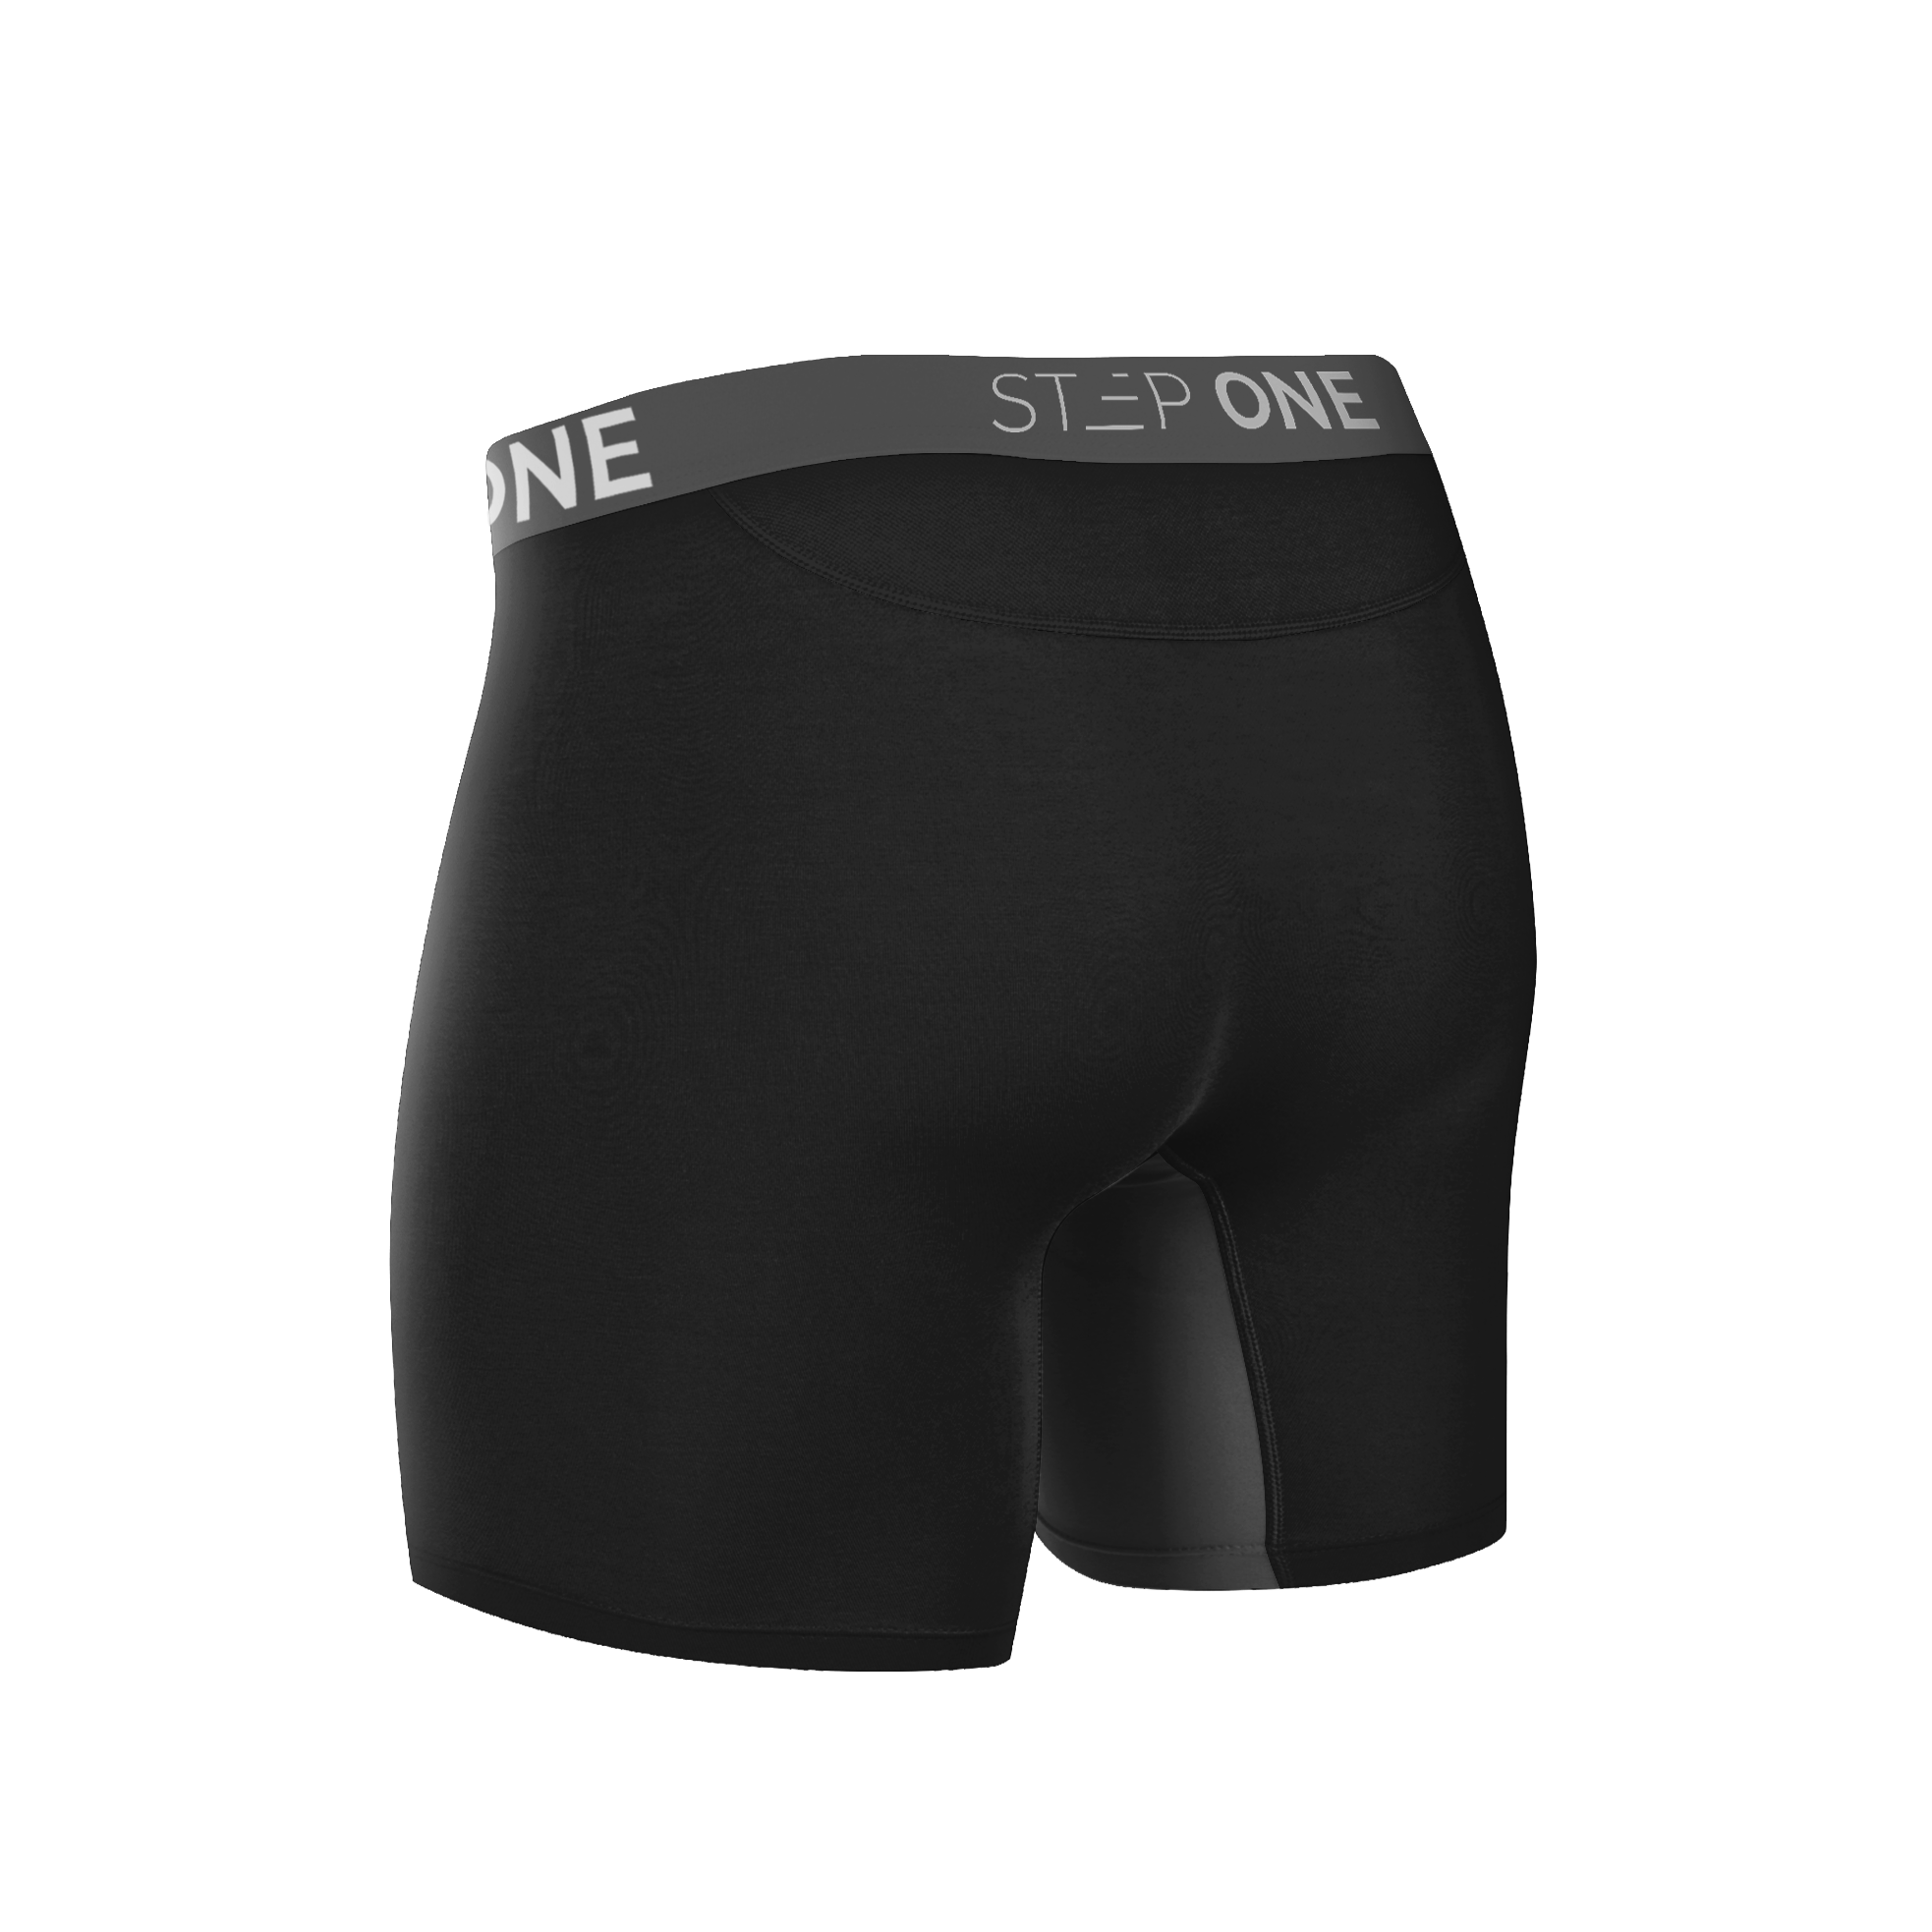 Boxer Brief Fly - Black Currants - View 2